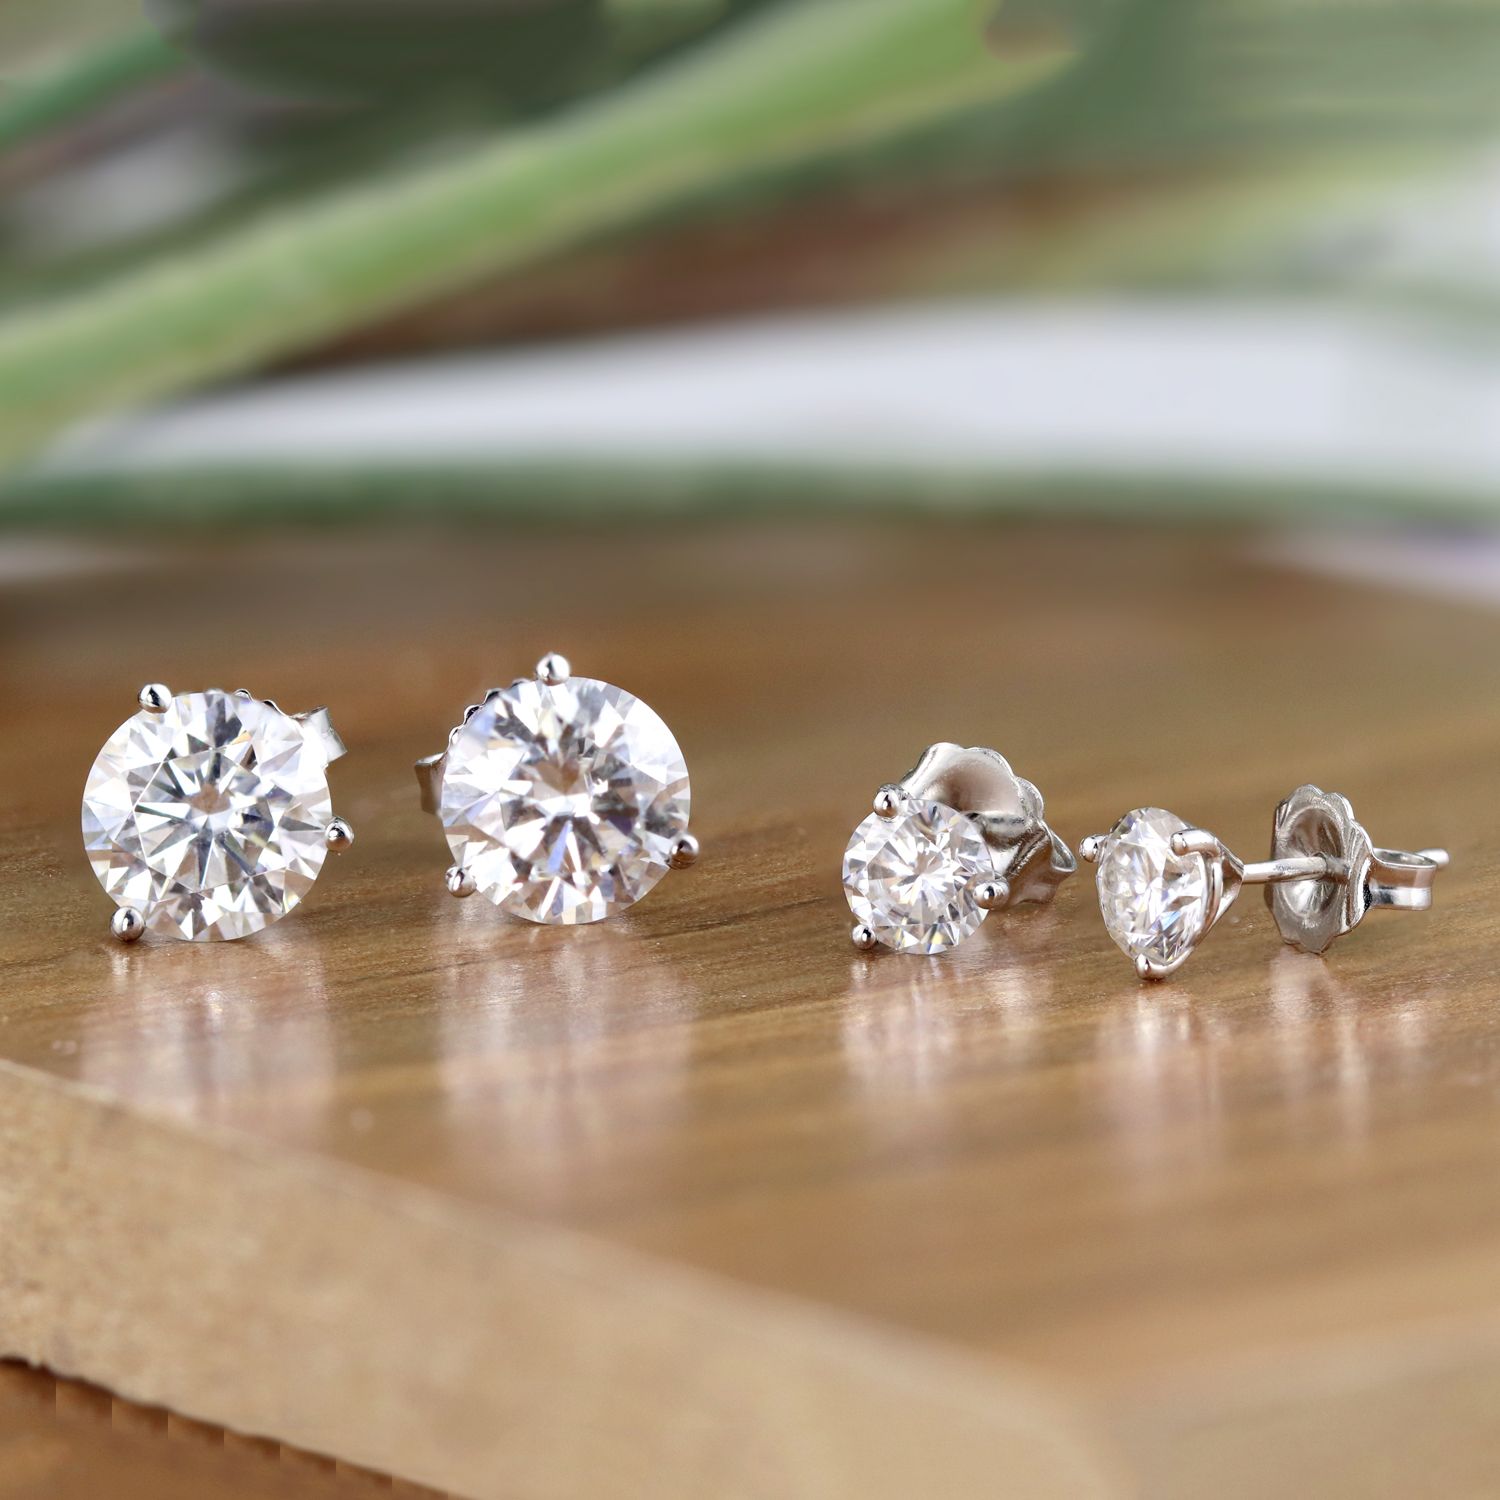 Pieces of Diamond Studs Earrings on a wooden table